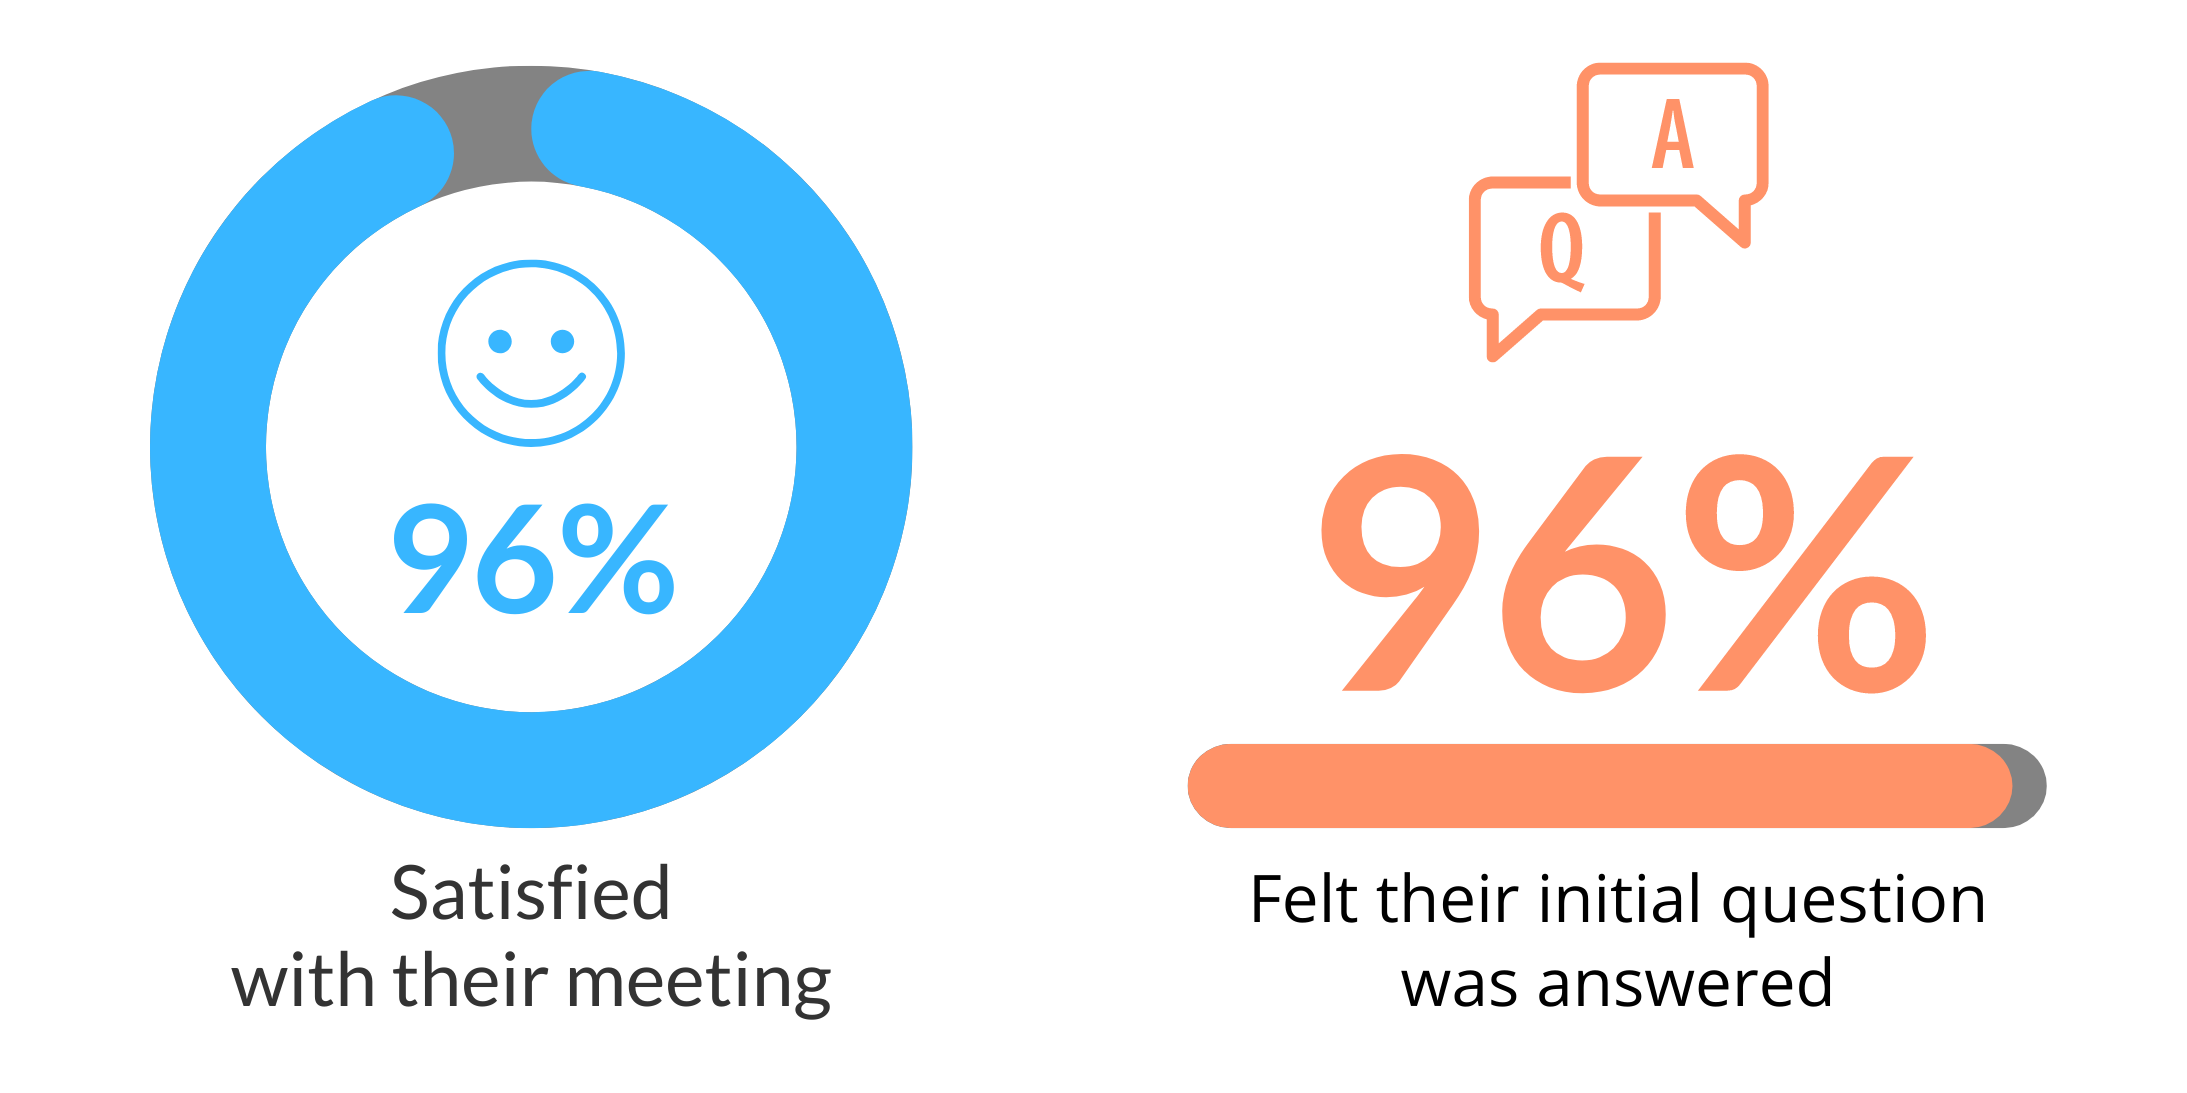 96% Satisfied with their meeting!  96% felt their initial question was answered. 